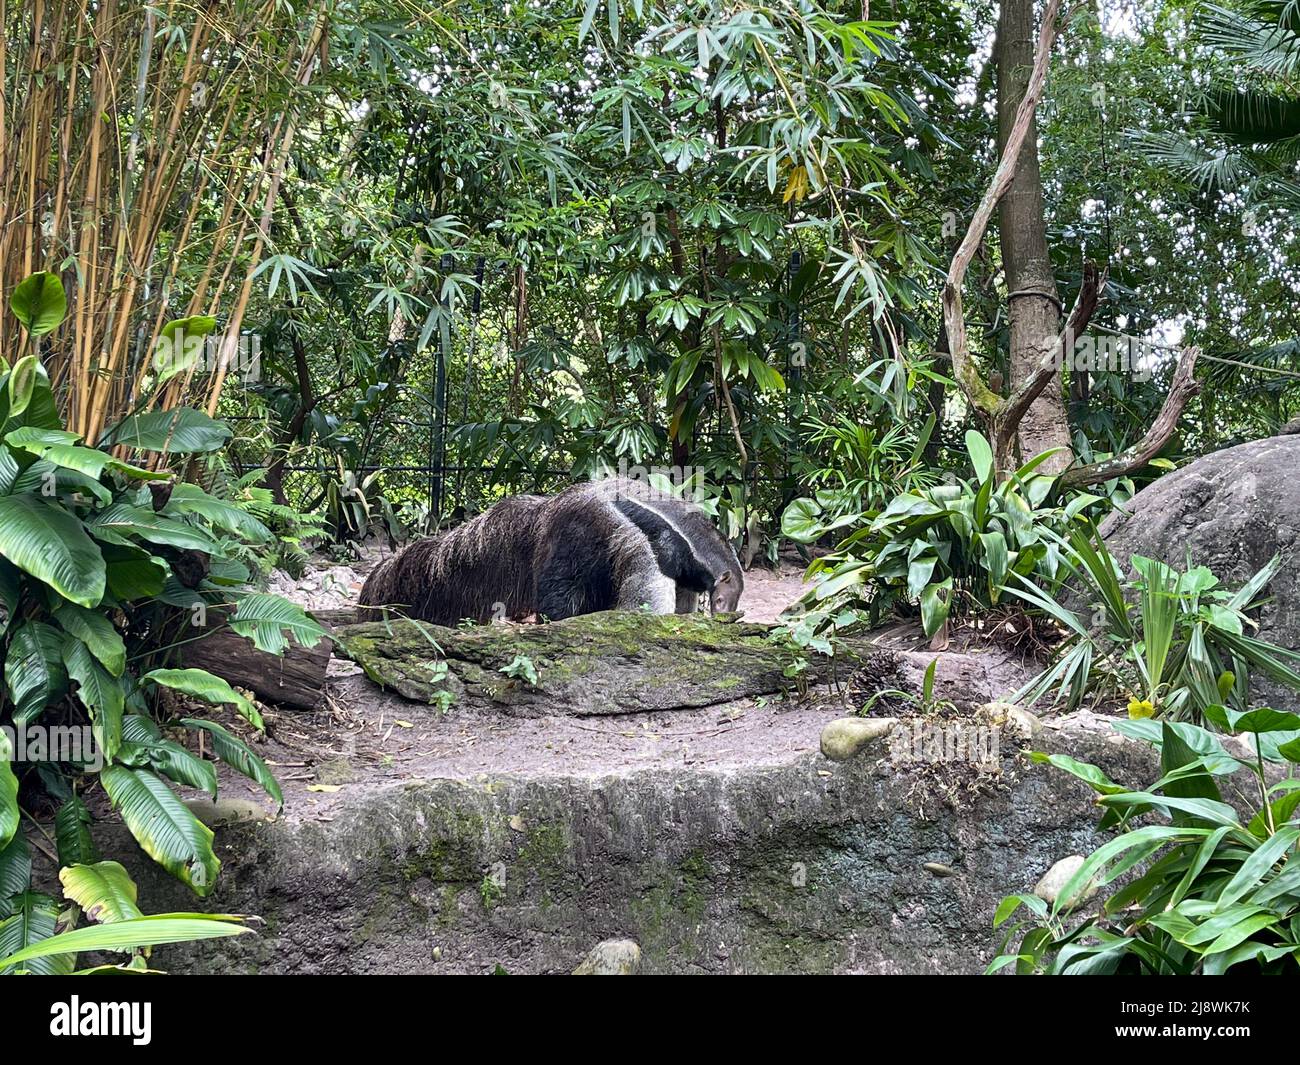 An Anteater in a zoo enclosure in Orlando, Florida. Stock Photo